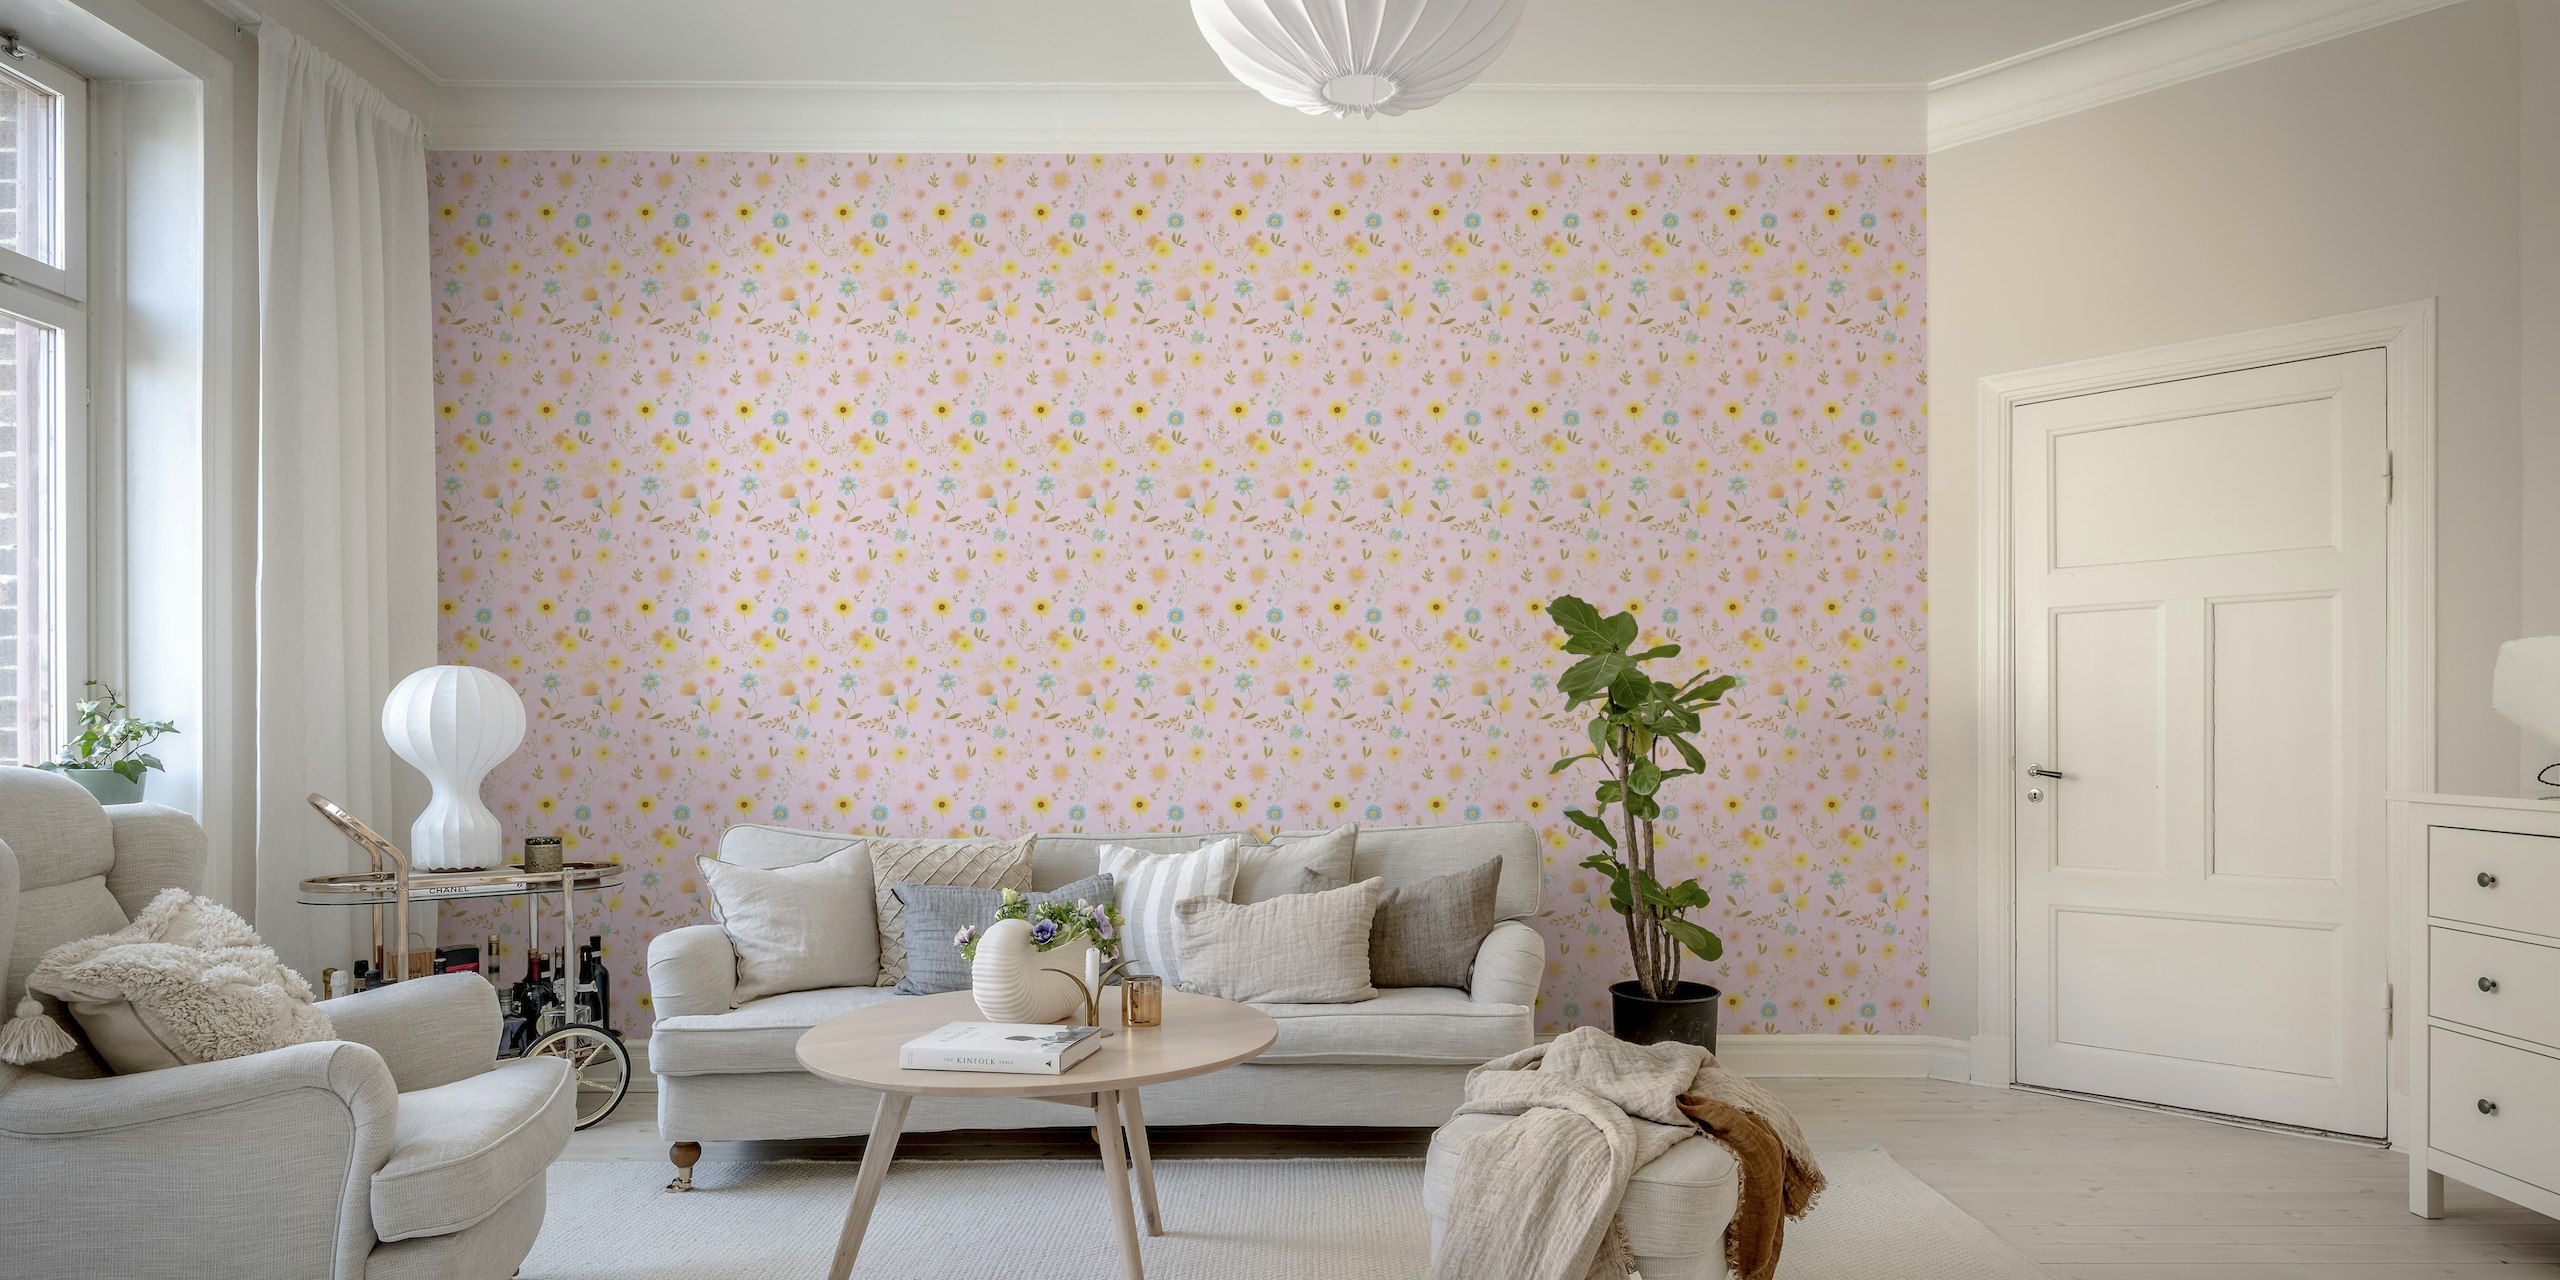 Pastel-colored floral wall mural on a rose pink background